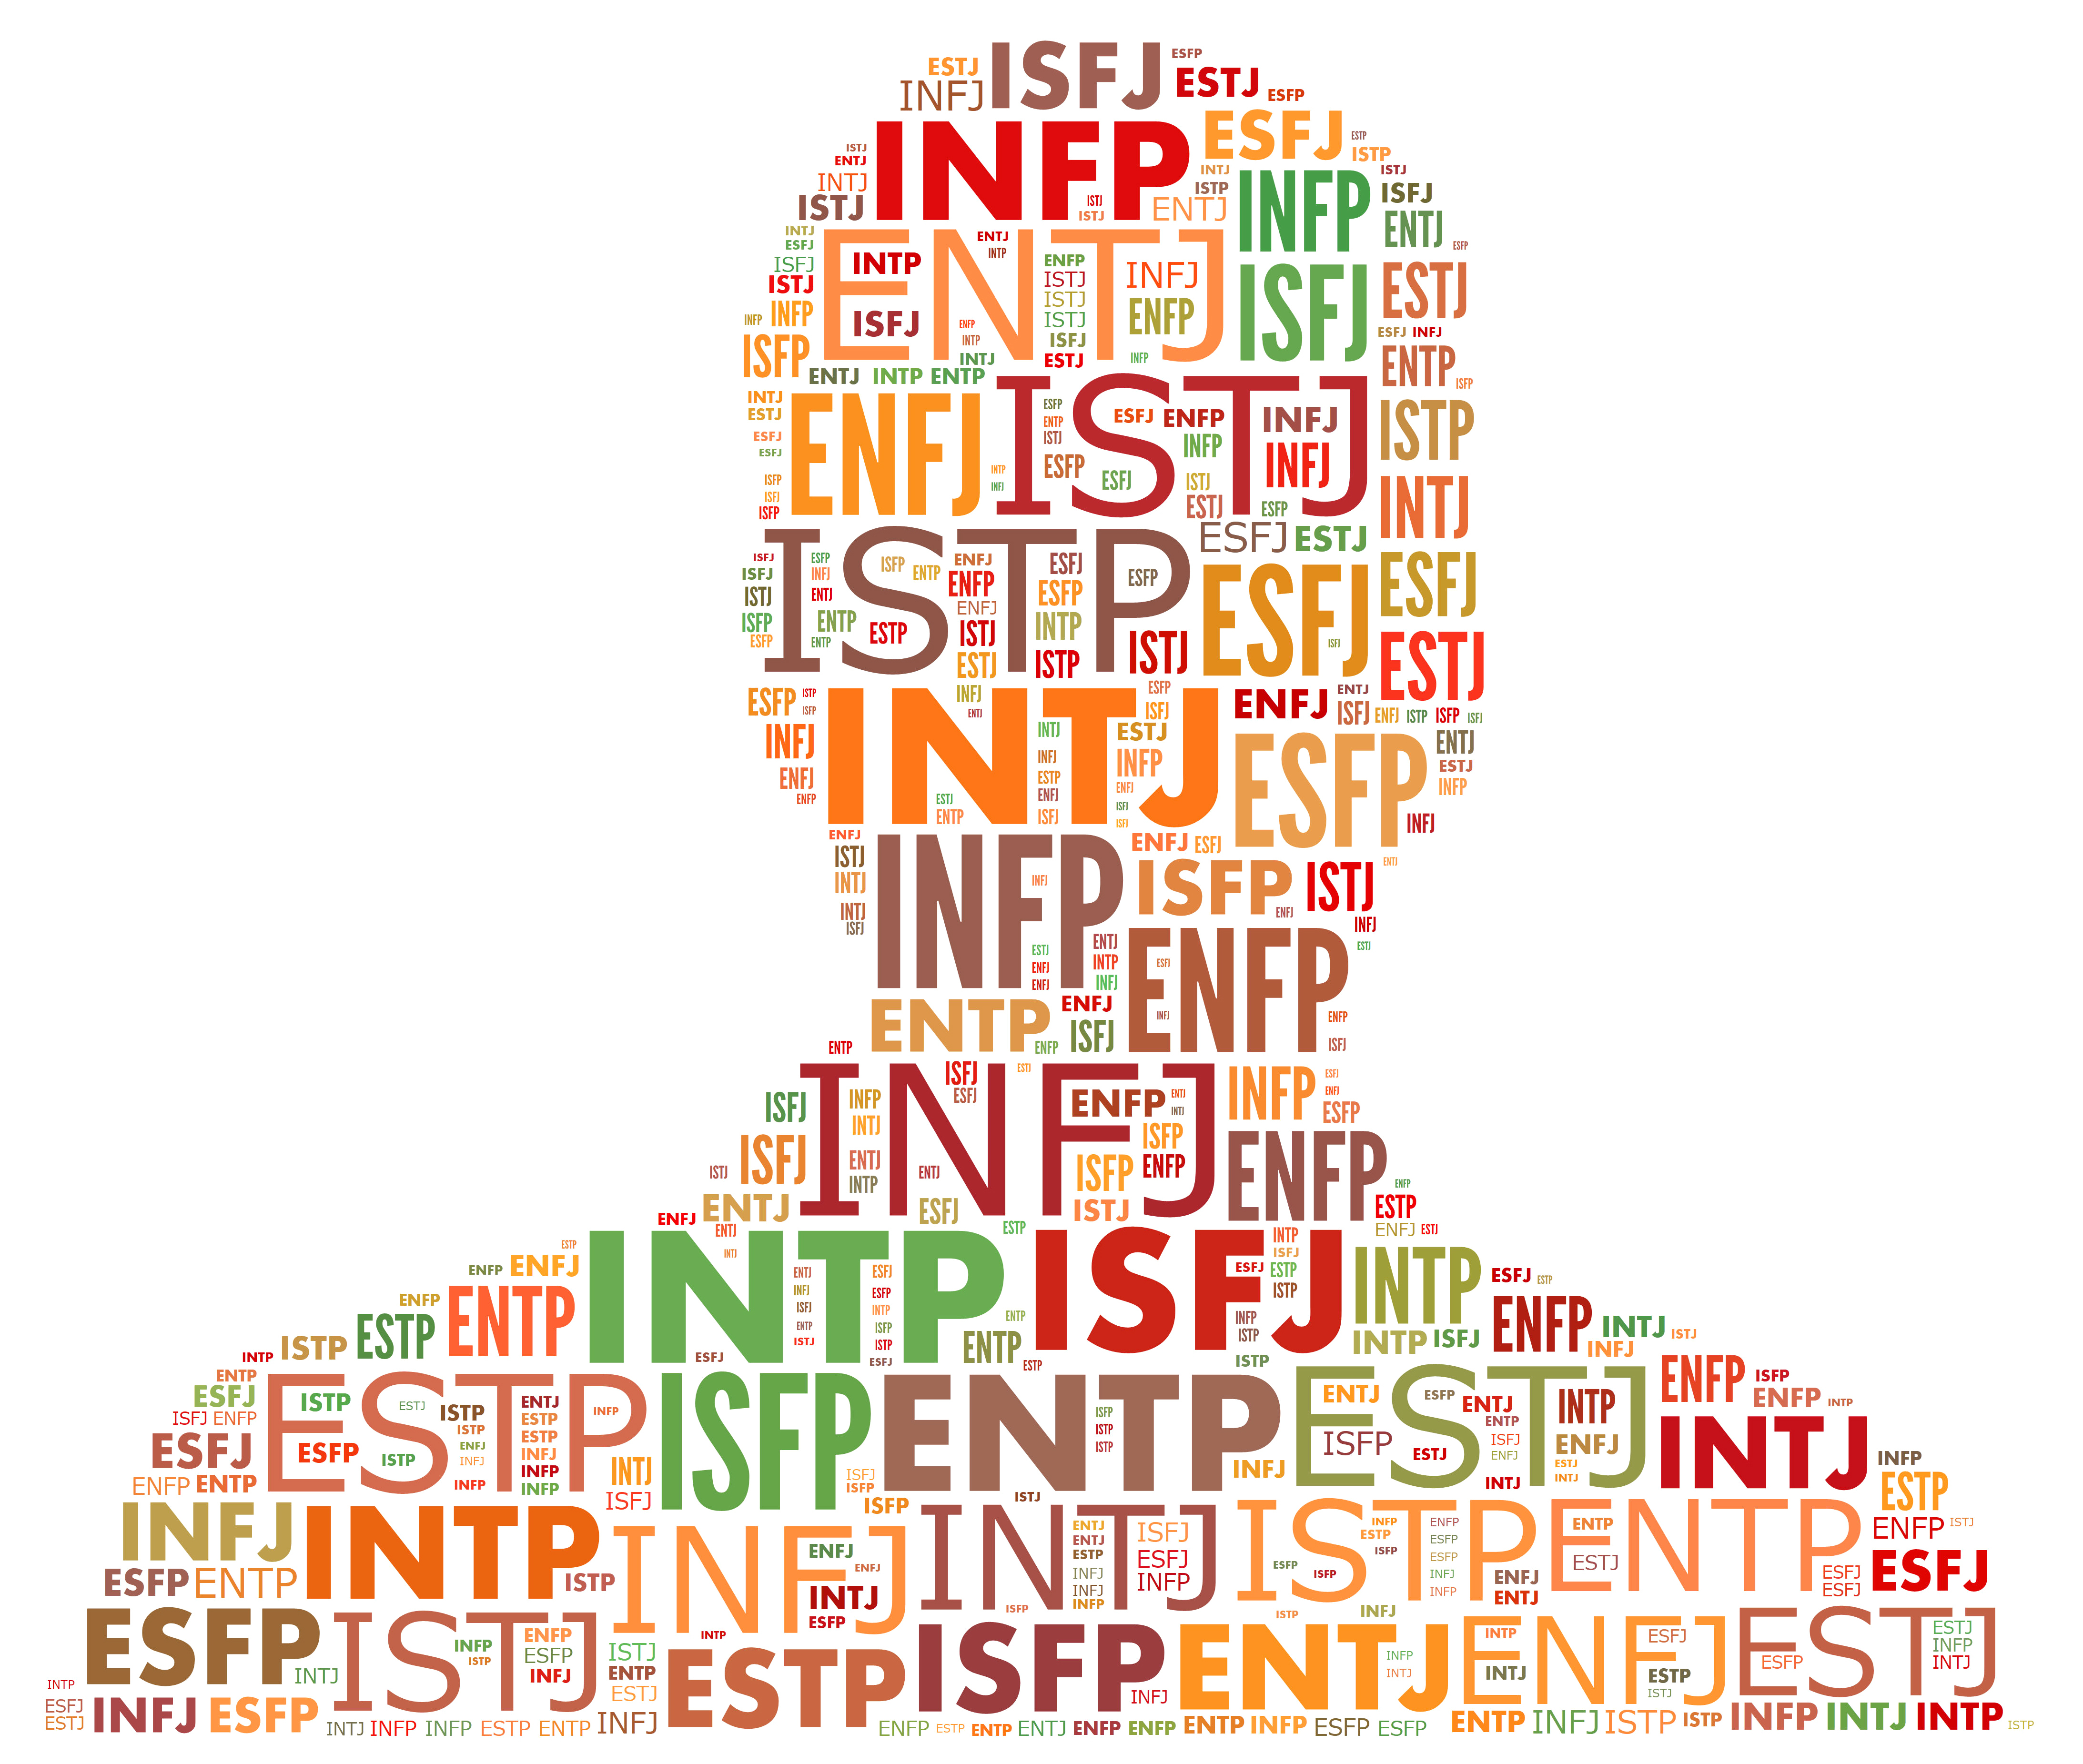 Russia MBTI Personality Type: ISTP or ISTJ?